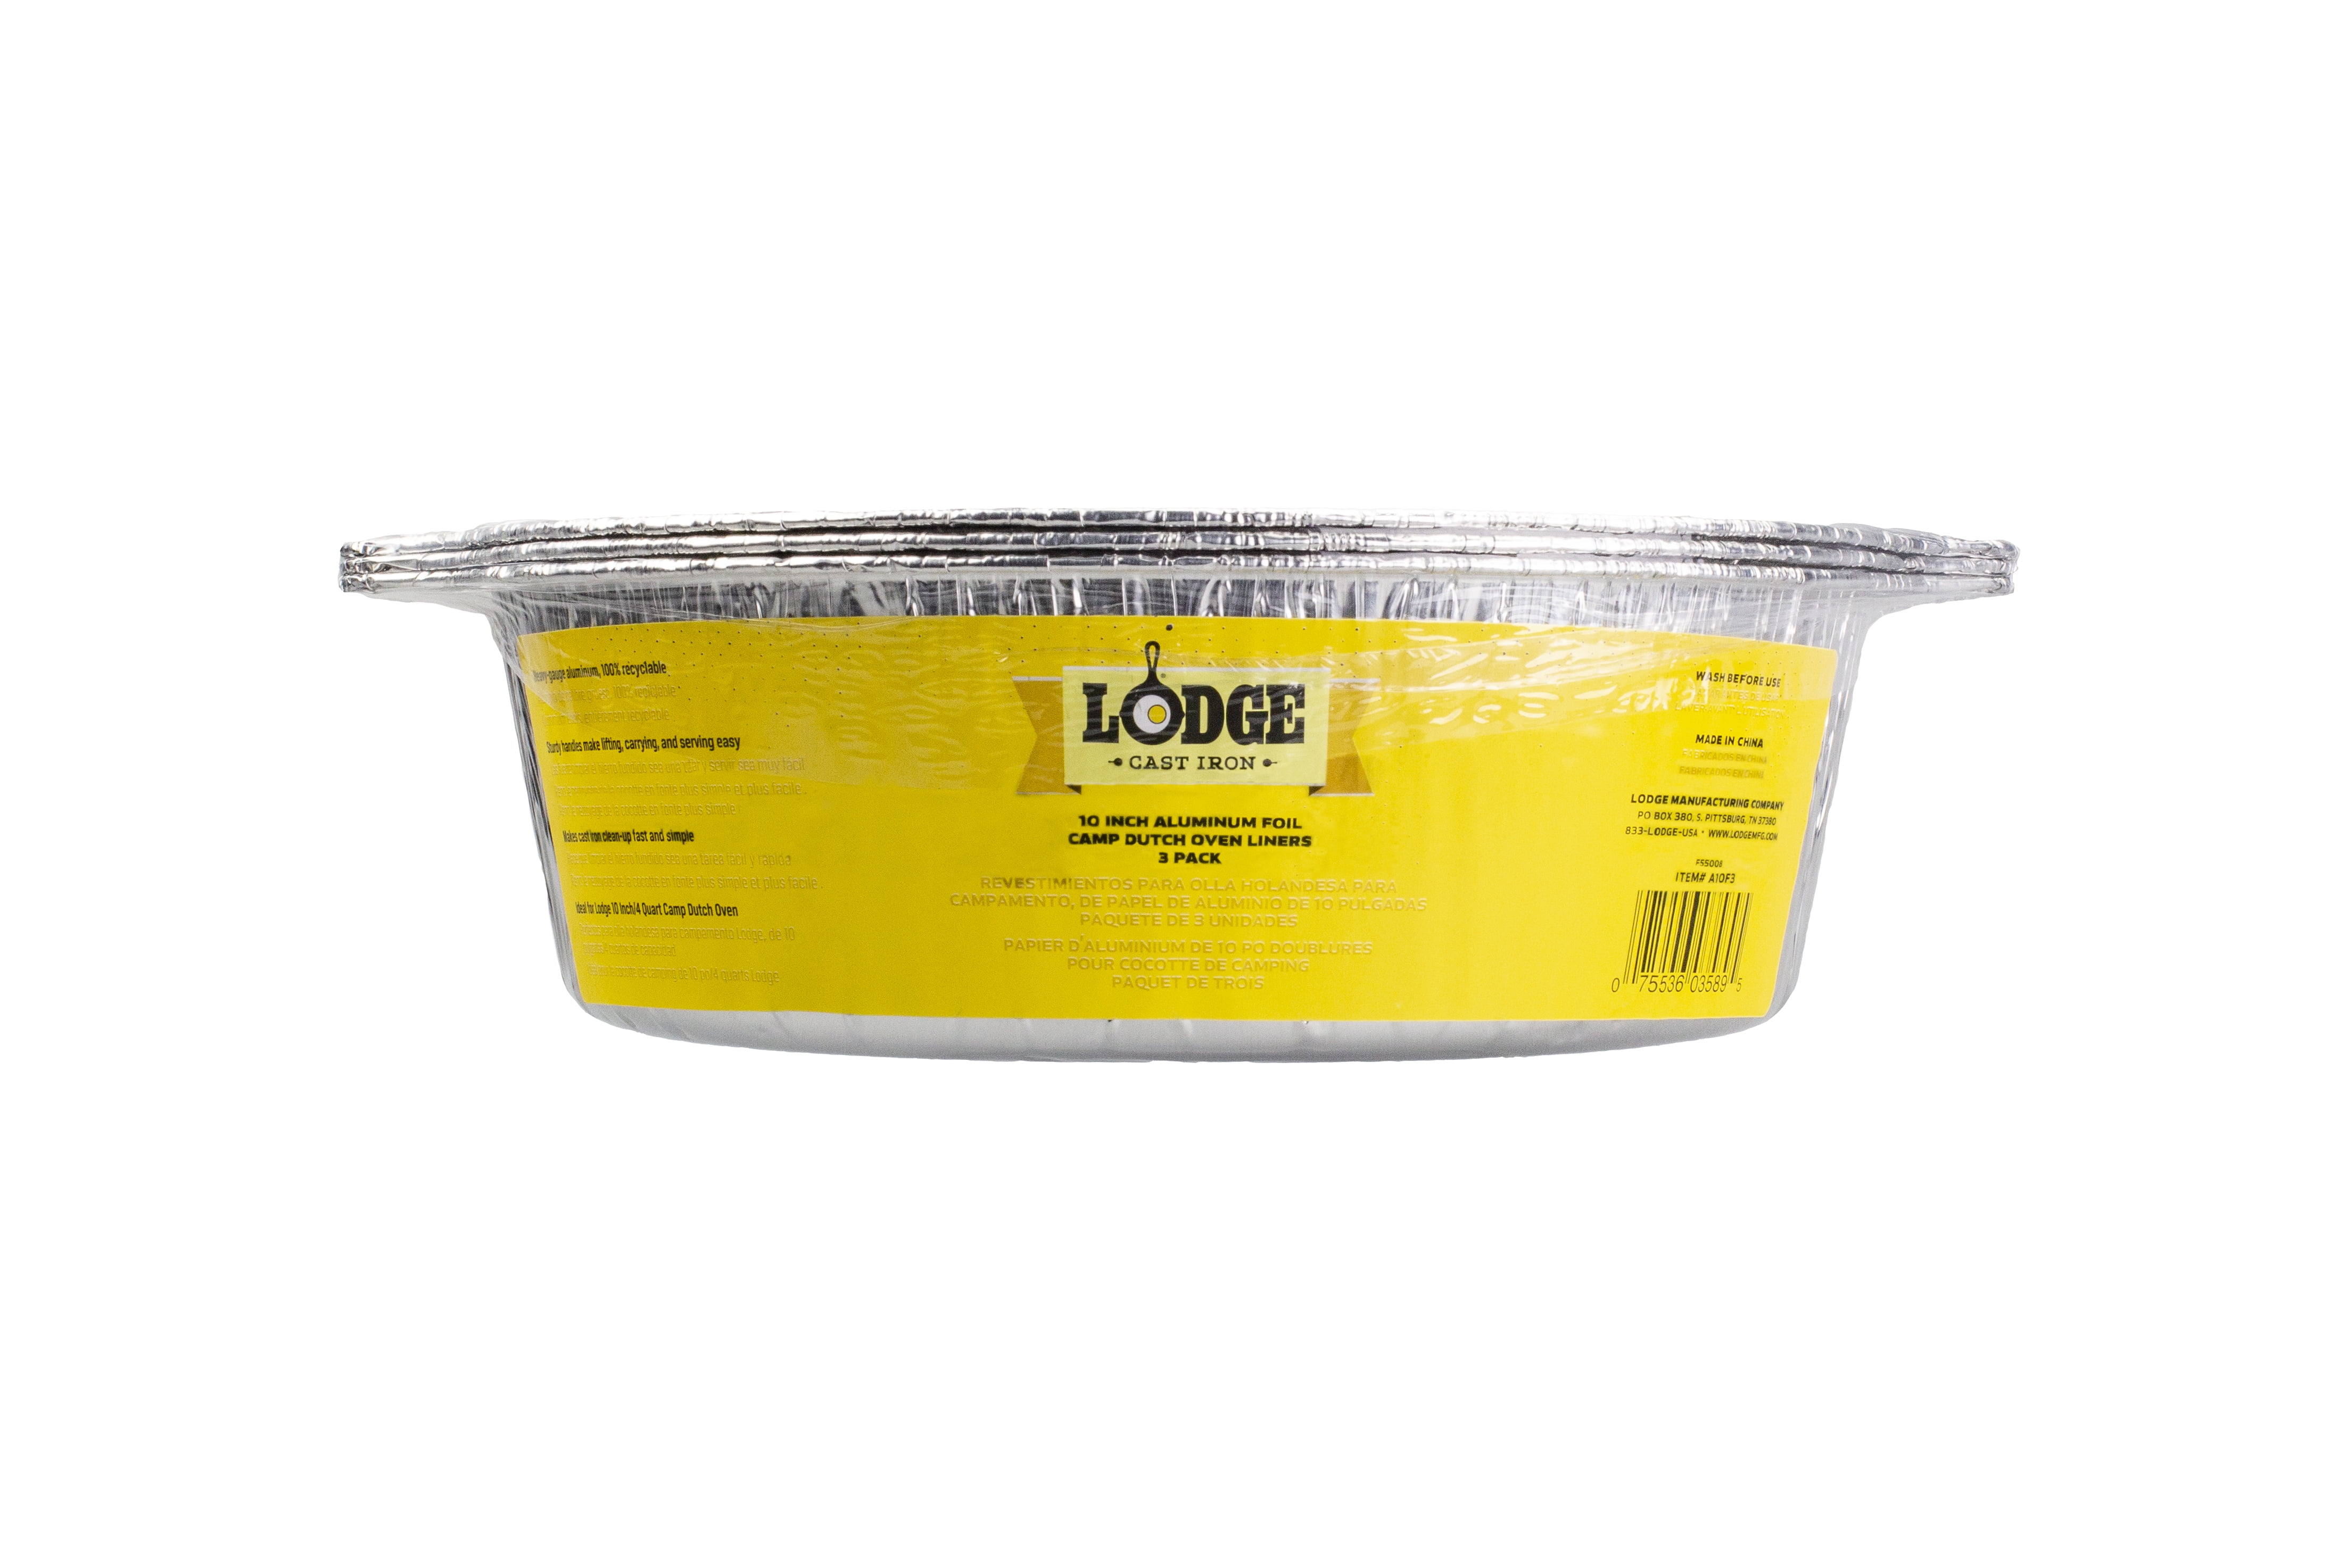 12” Disposable Dutch Oven Liners and More